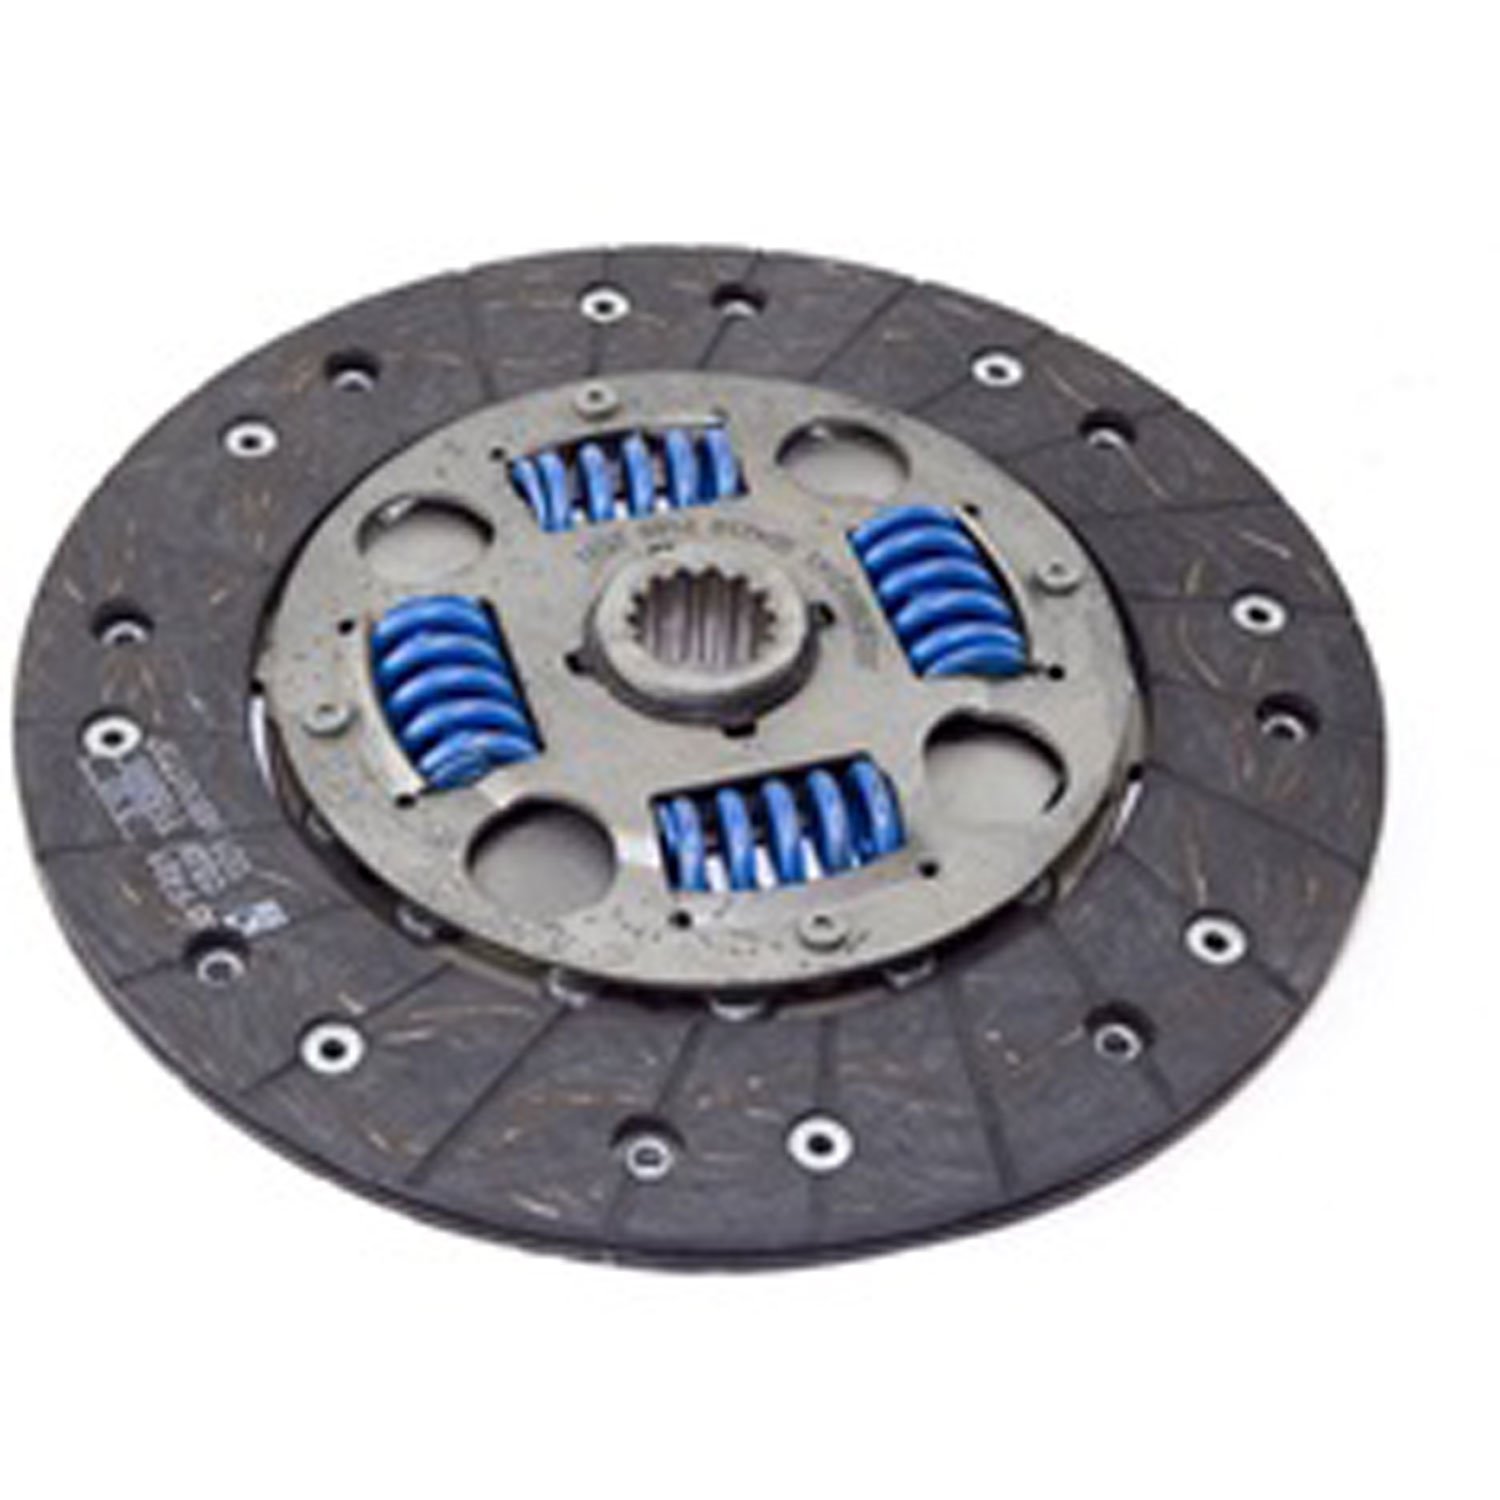 Replacement clutch disc from Omix-ADA, Fits 91-92 & 94-01 Jeep Wranglers and Cherokee with a 2.5